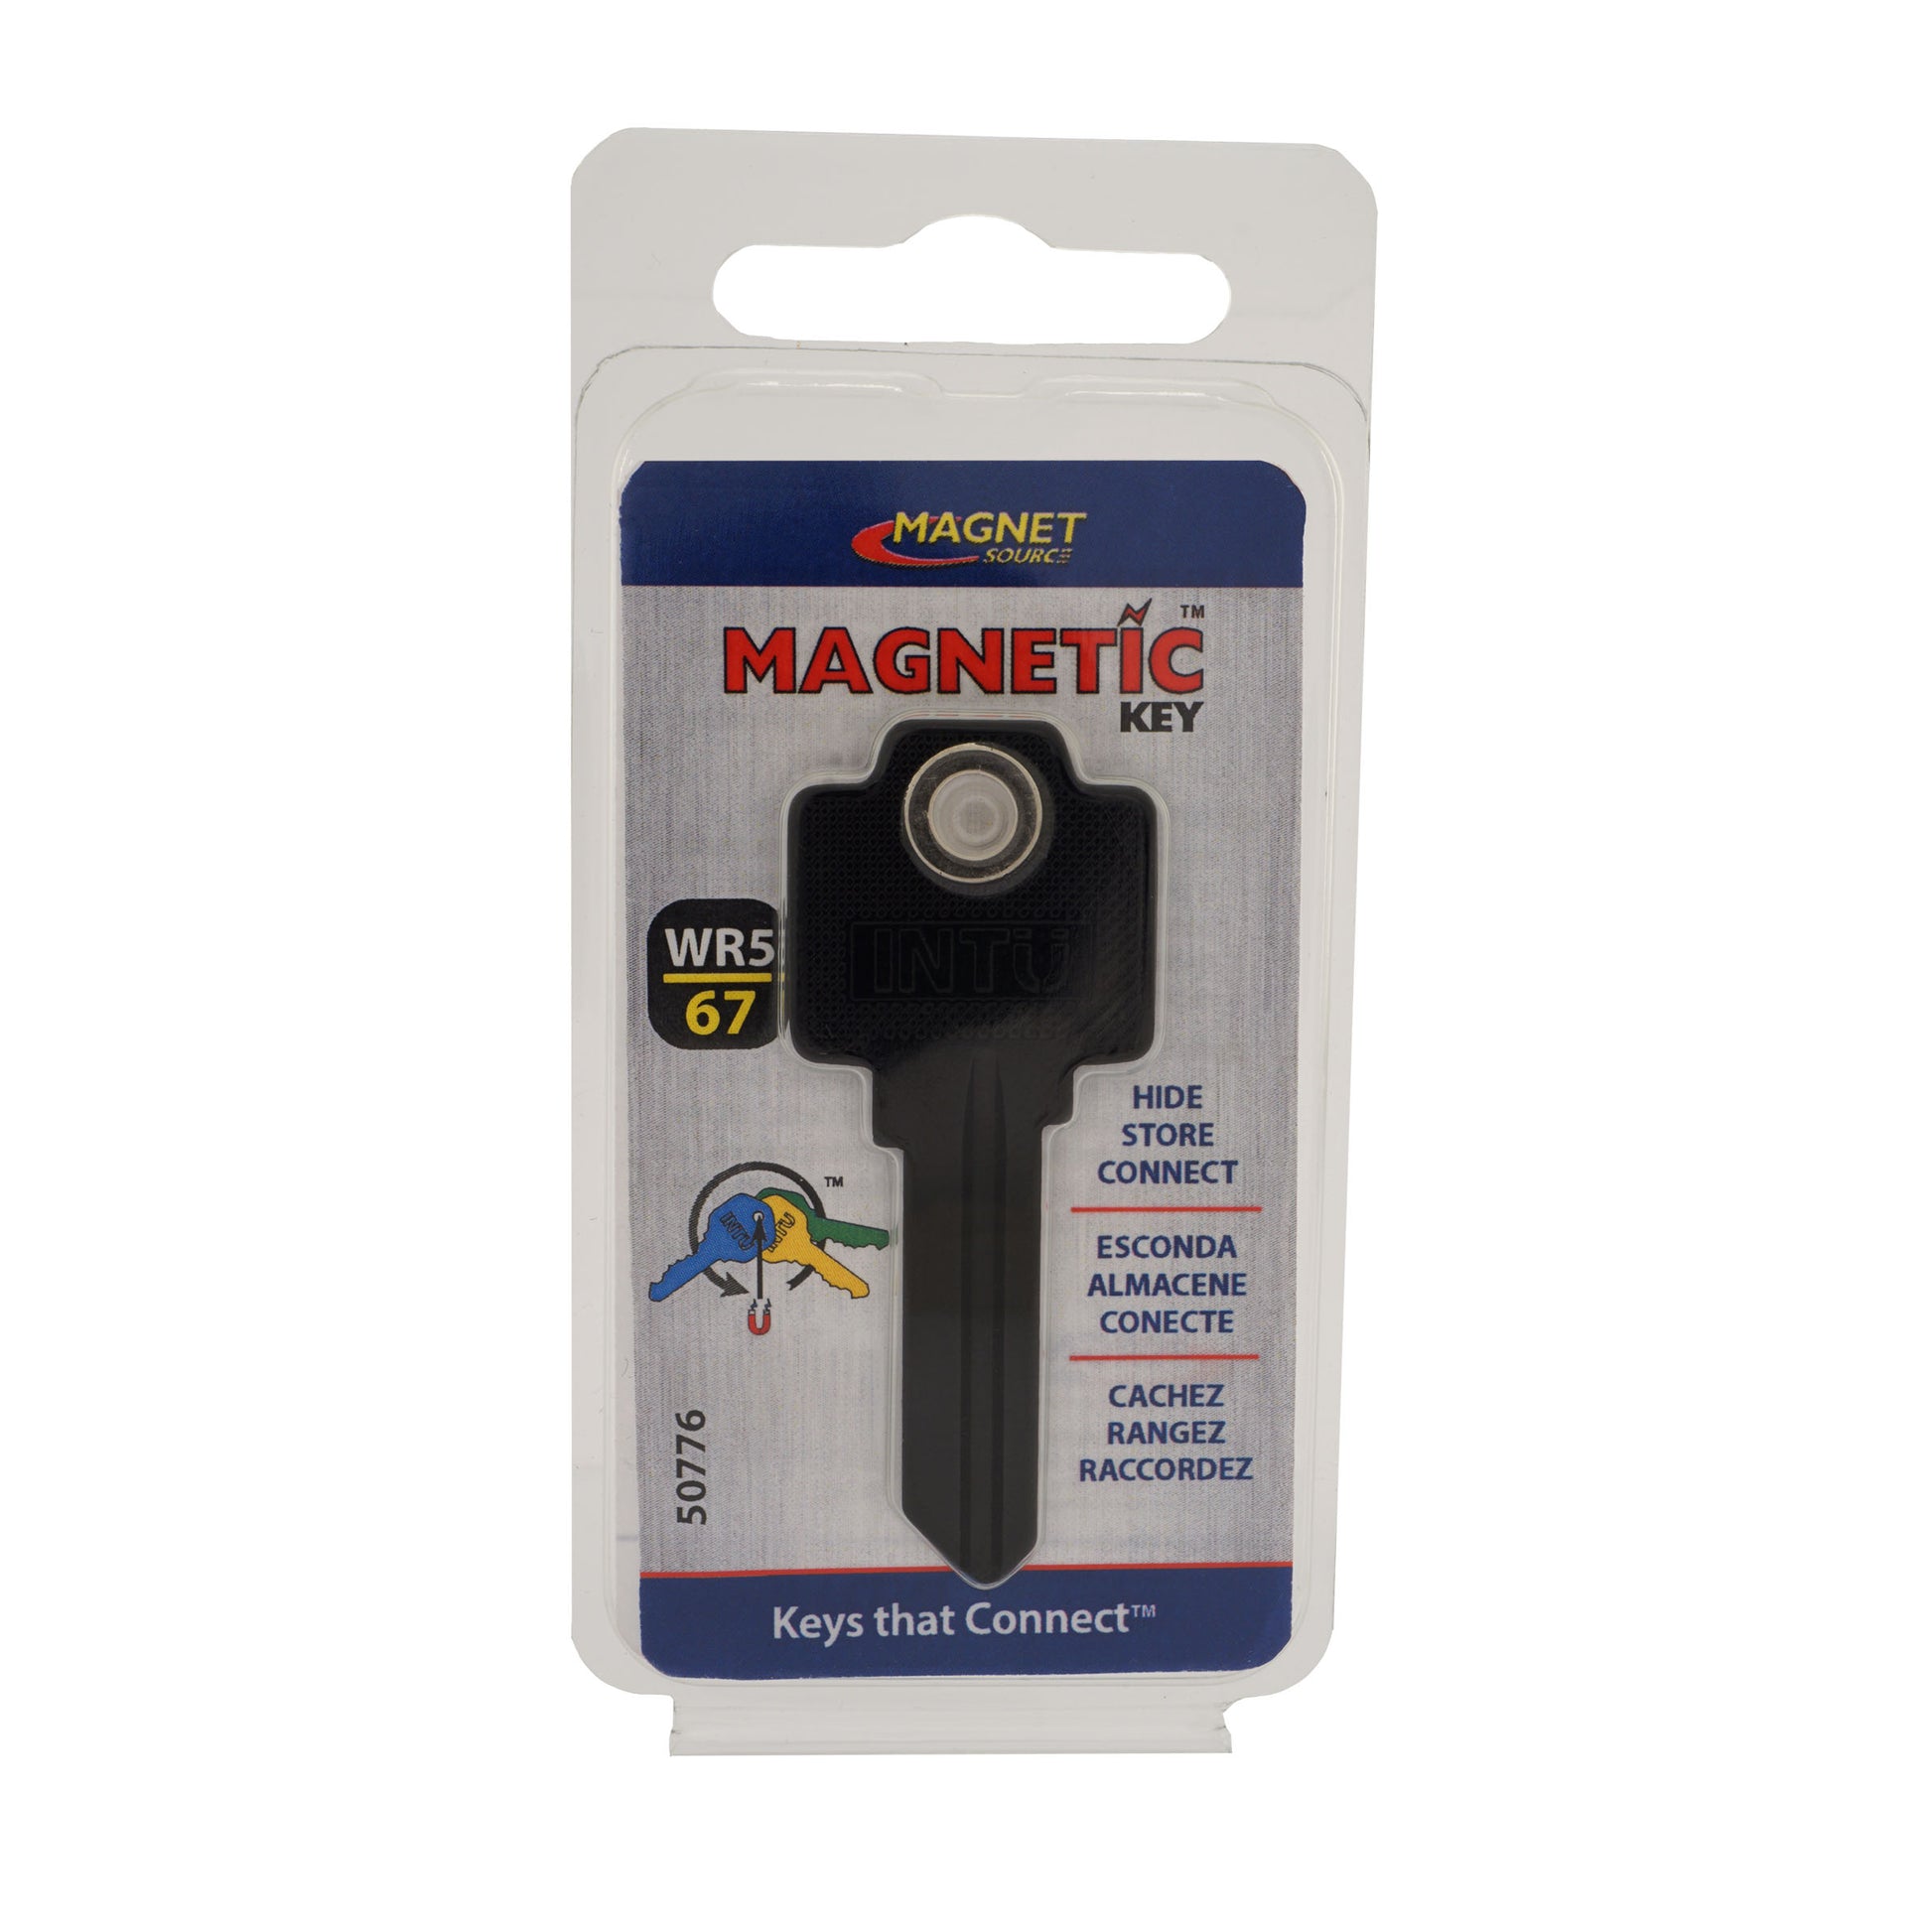 Load image into Gallery viewer, 50776 Magnetic Key, WR5-67 Black - Side View